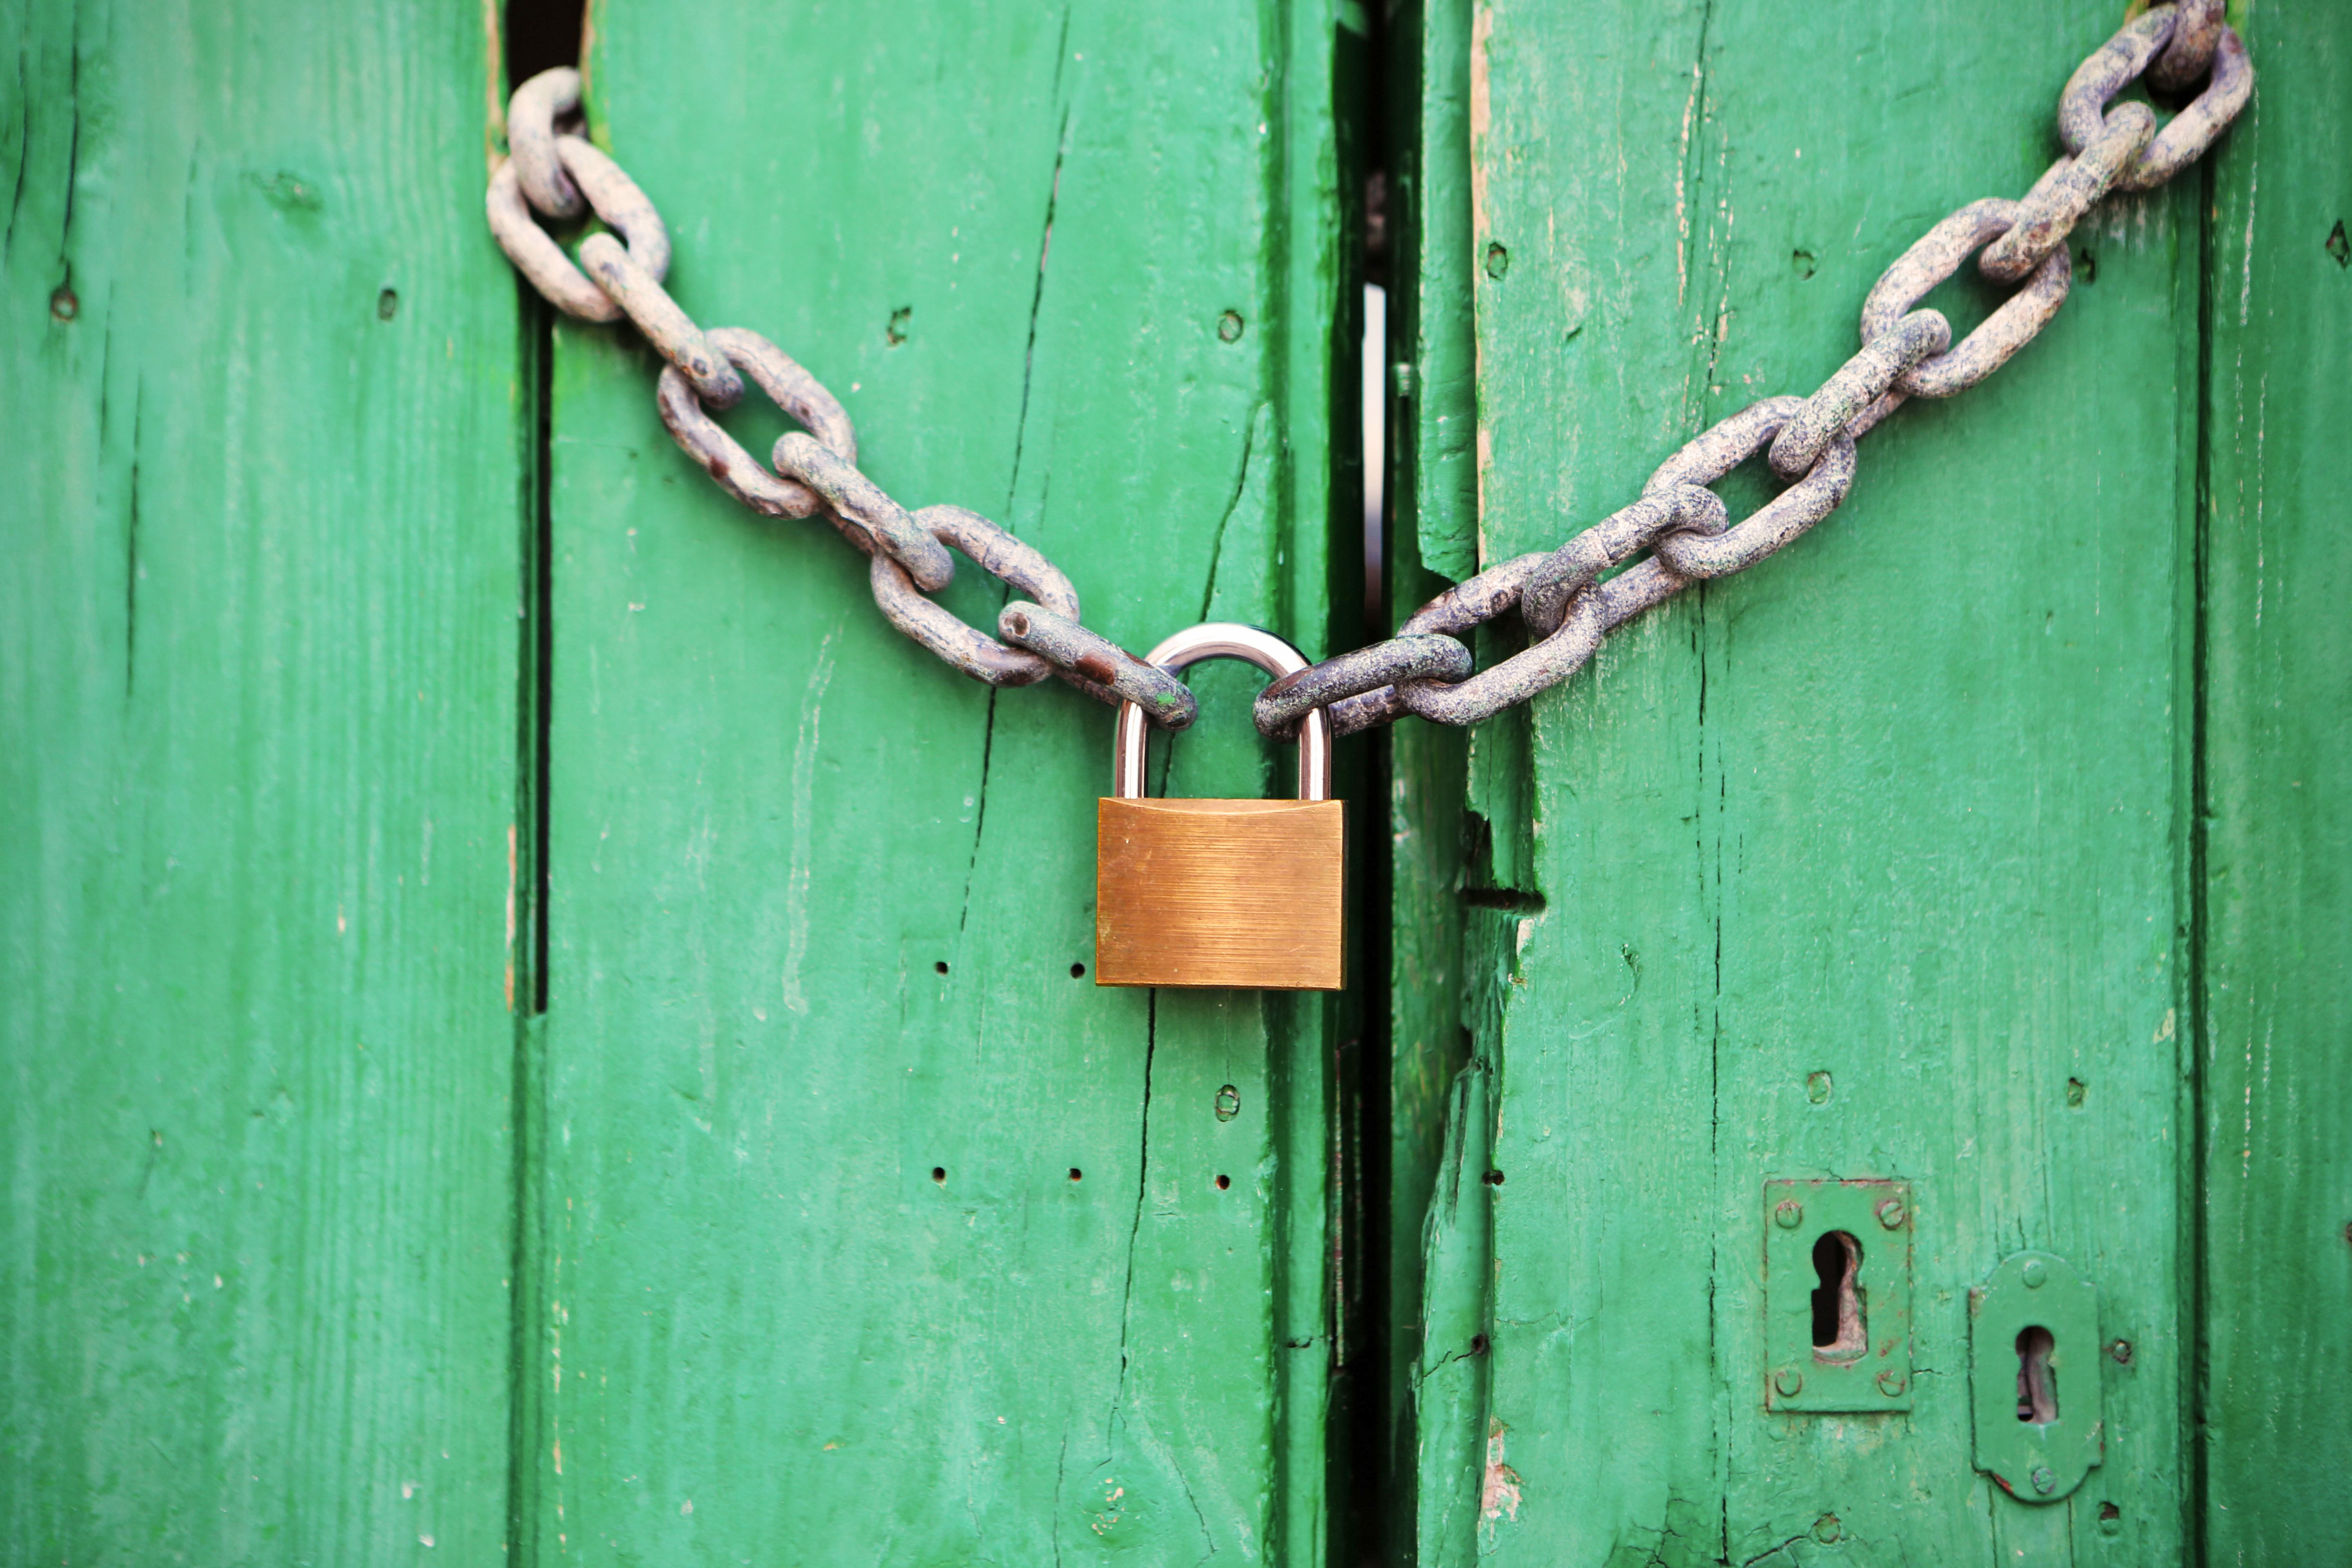 Green doors closed and barred by a thick chain and padlock.